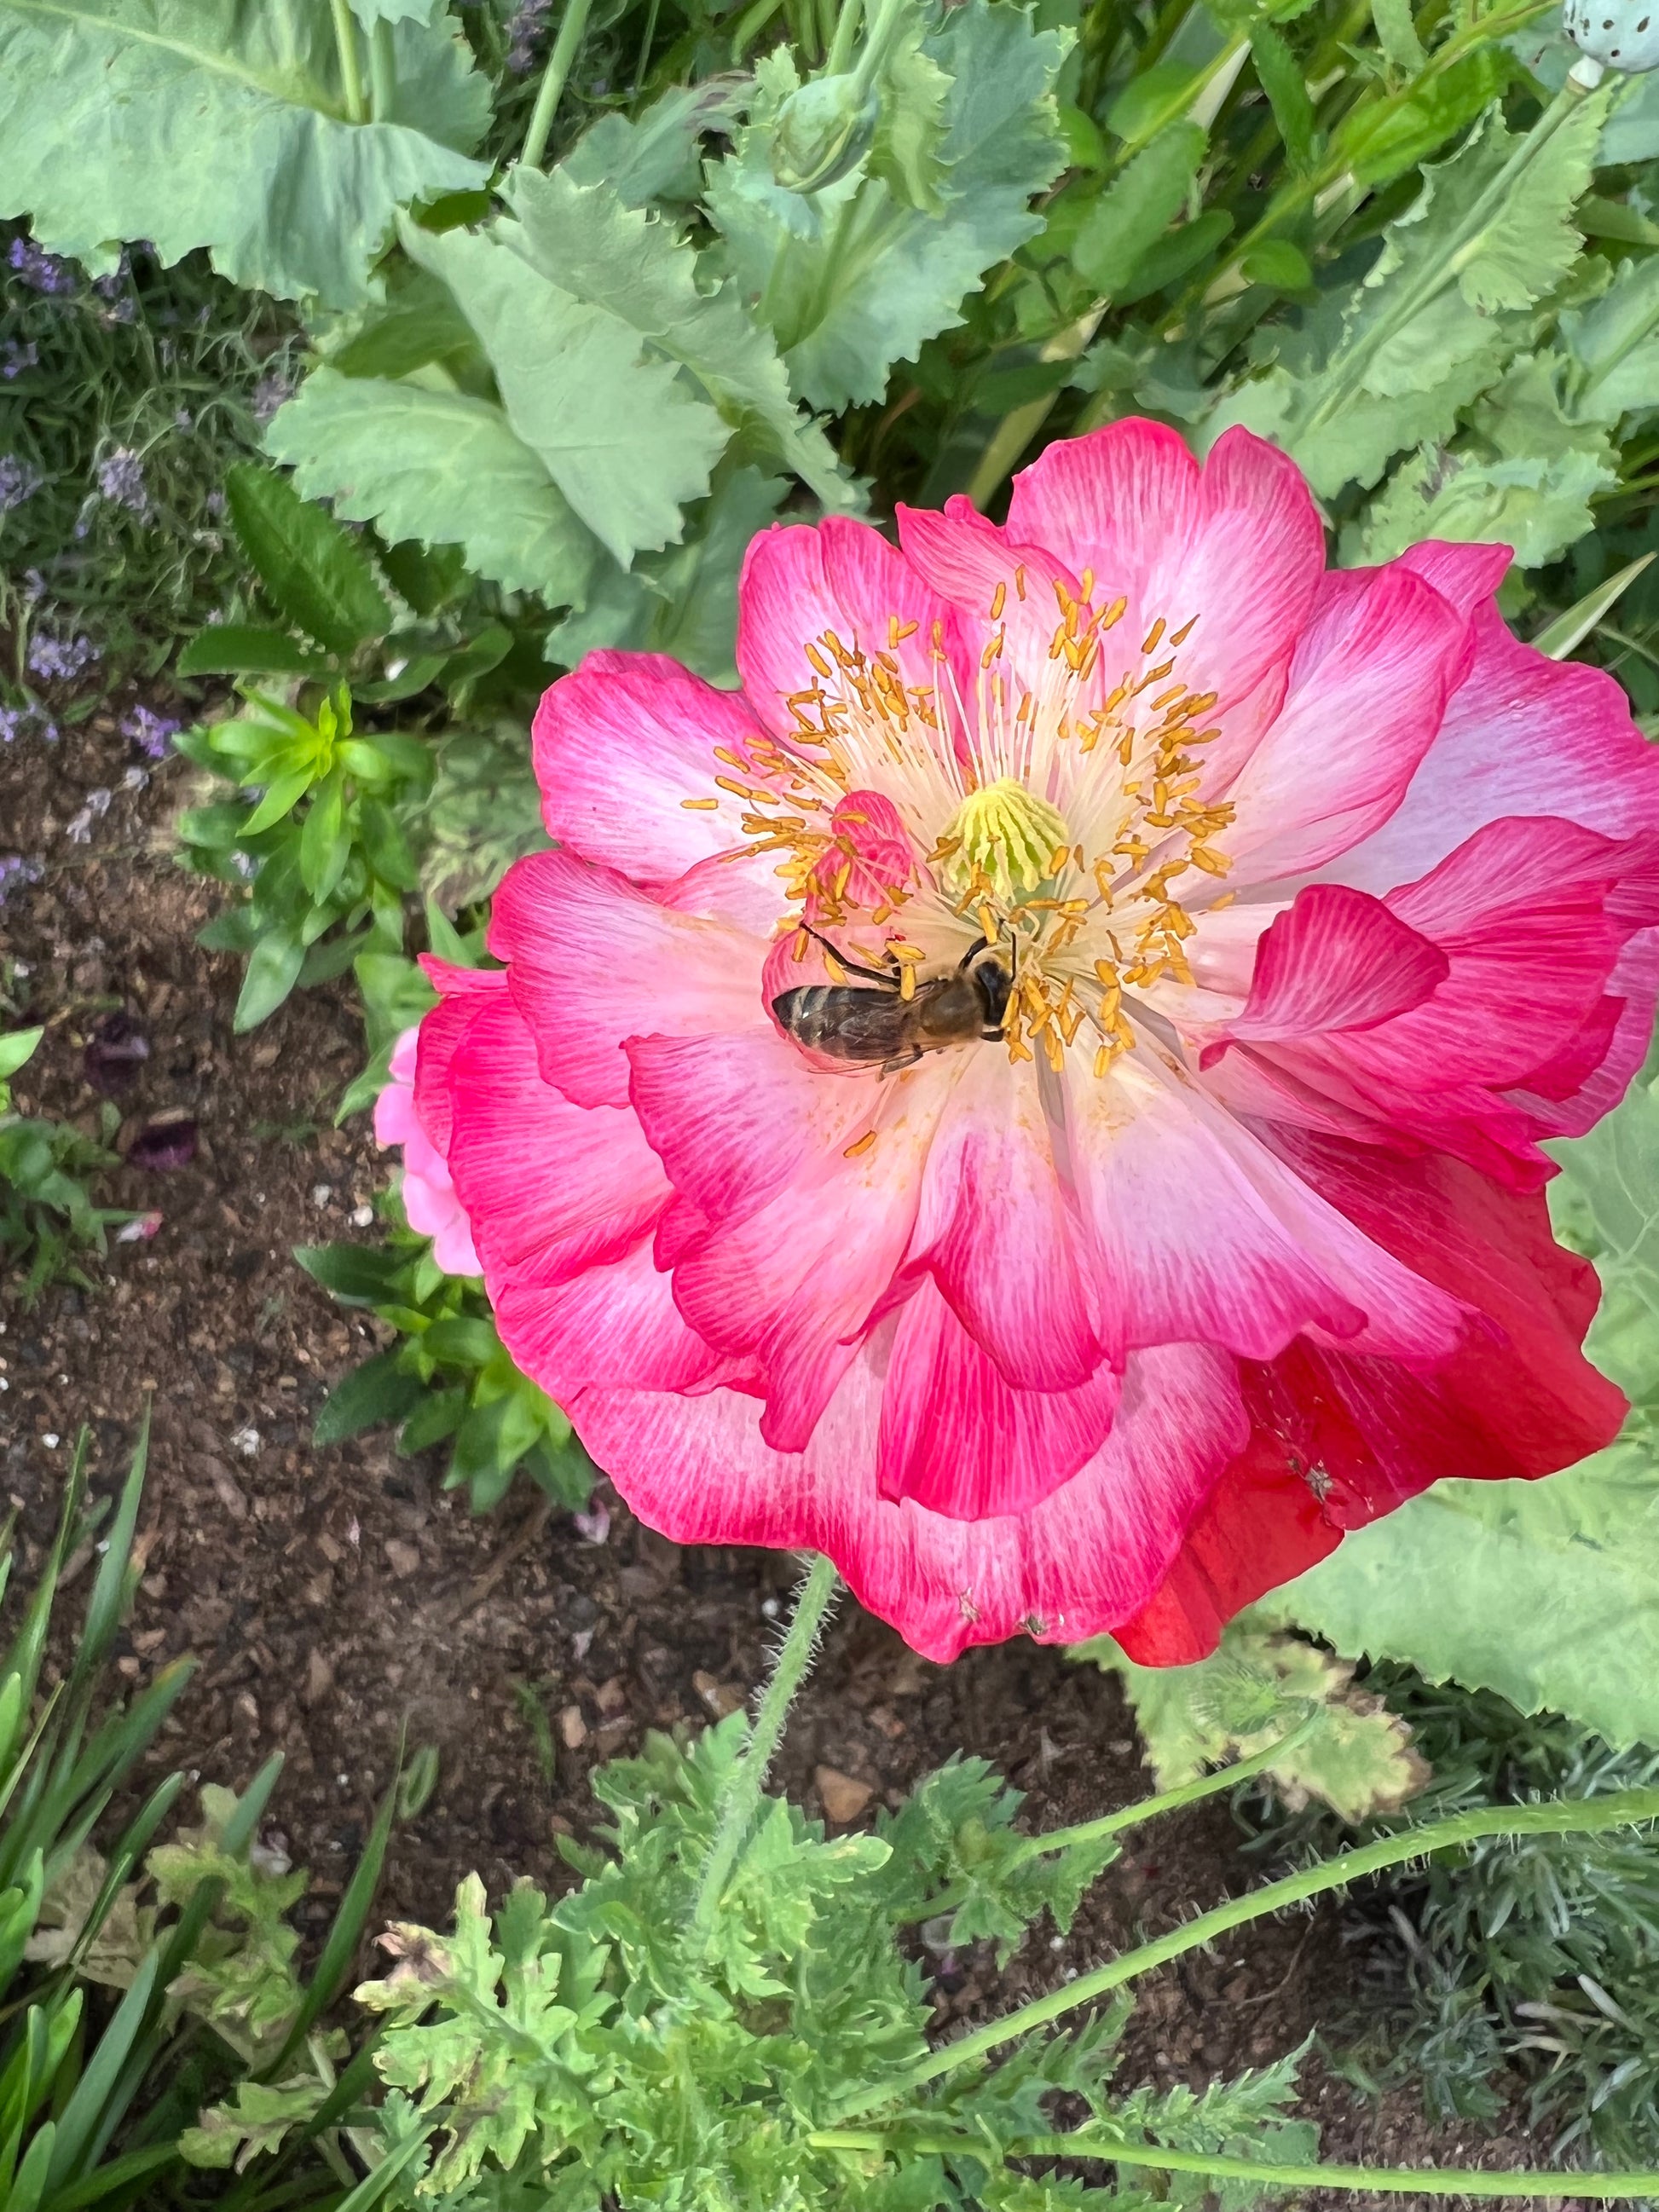 bees flock to the large blooms of shirley poppy supreme